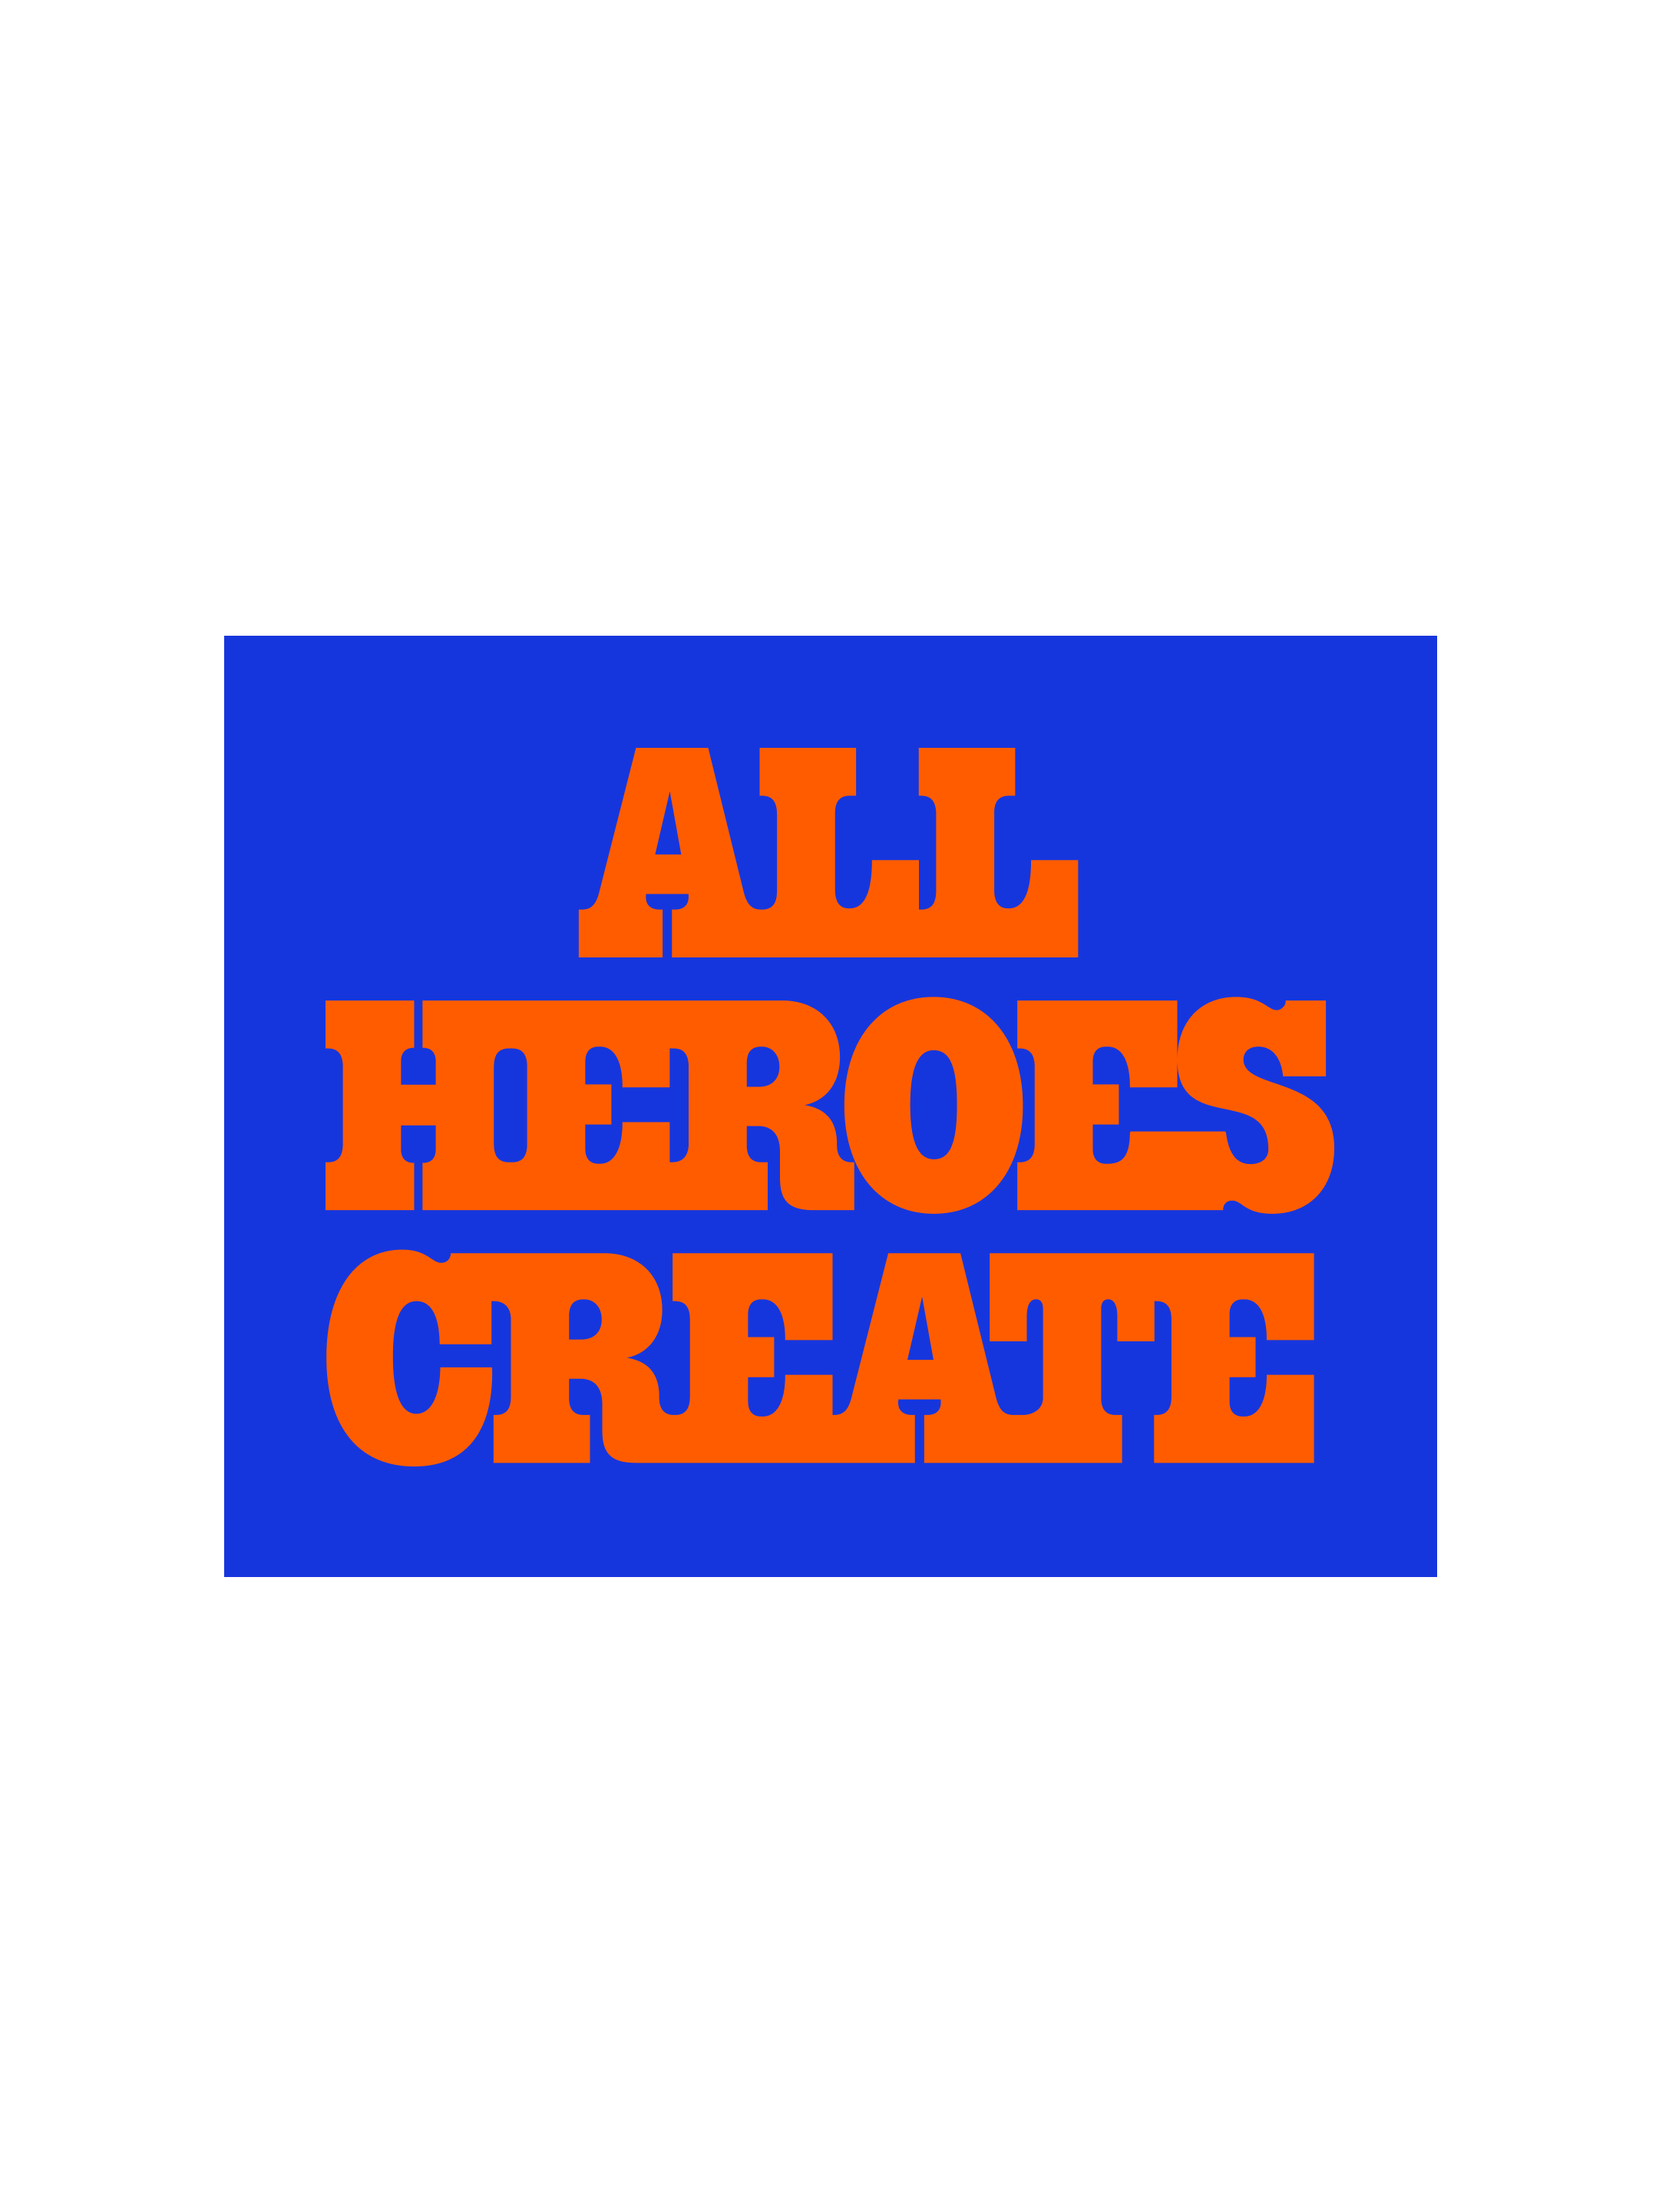 ALL HEROES CREATE POSTER